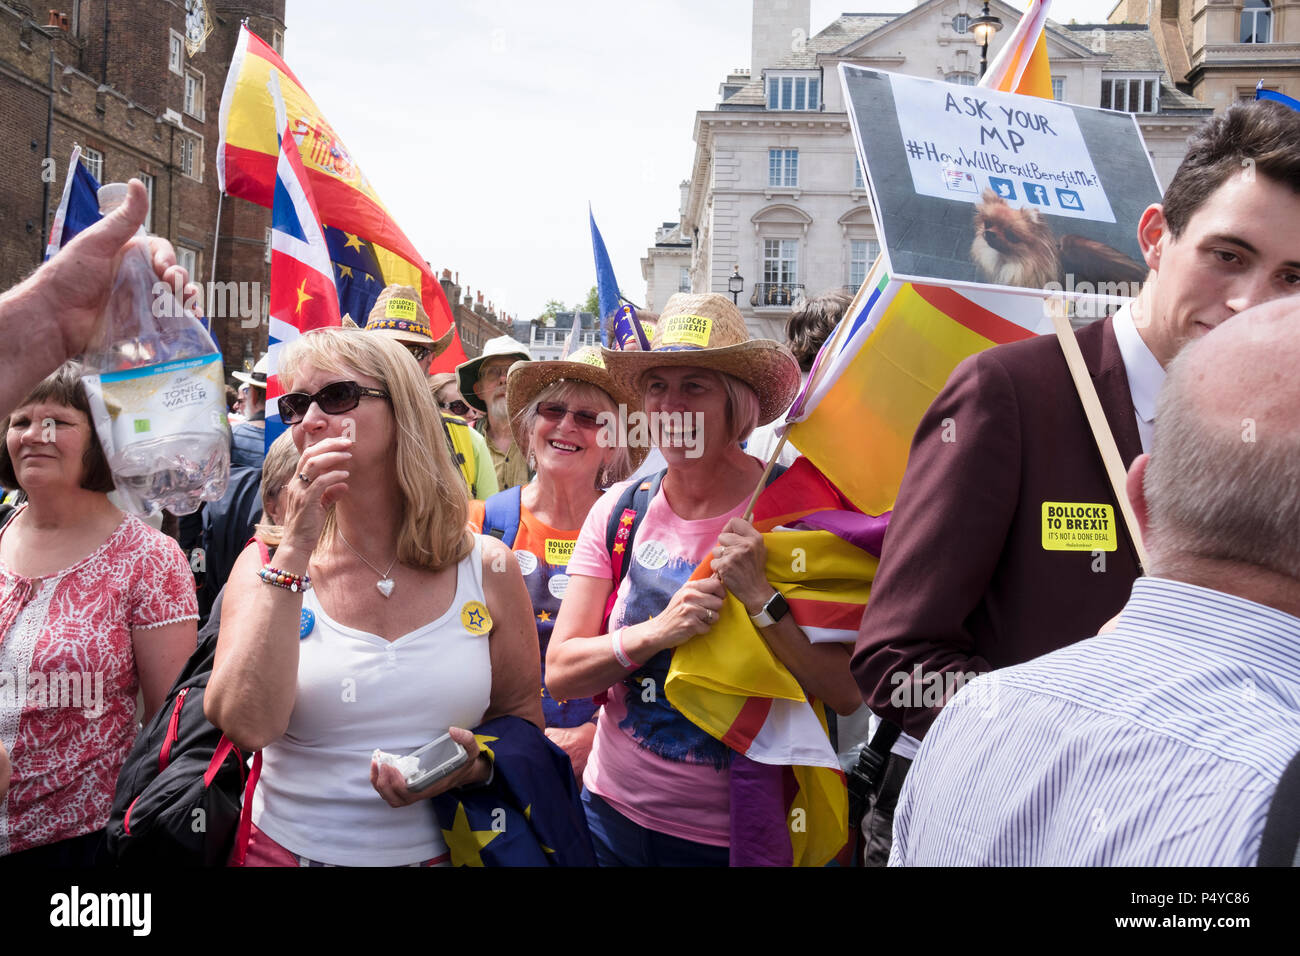 London, UK. 23rd June 2018. More than 100,000 people have marched through central London to demand a final vote on any UK exit deal, on the second anniversary of the Brexit vote. Anti-Brexit marchers travelled from across the country to join the rally, organised by a number of Westminster-based and grassroots lobbying groups and marks the launch of a nationwide petition for a “People's Vote”. London, UK. 23 June 2018 Credit: Mike Abrahams/Alamy Live News Stock Photo